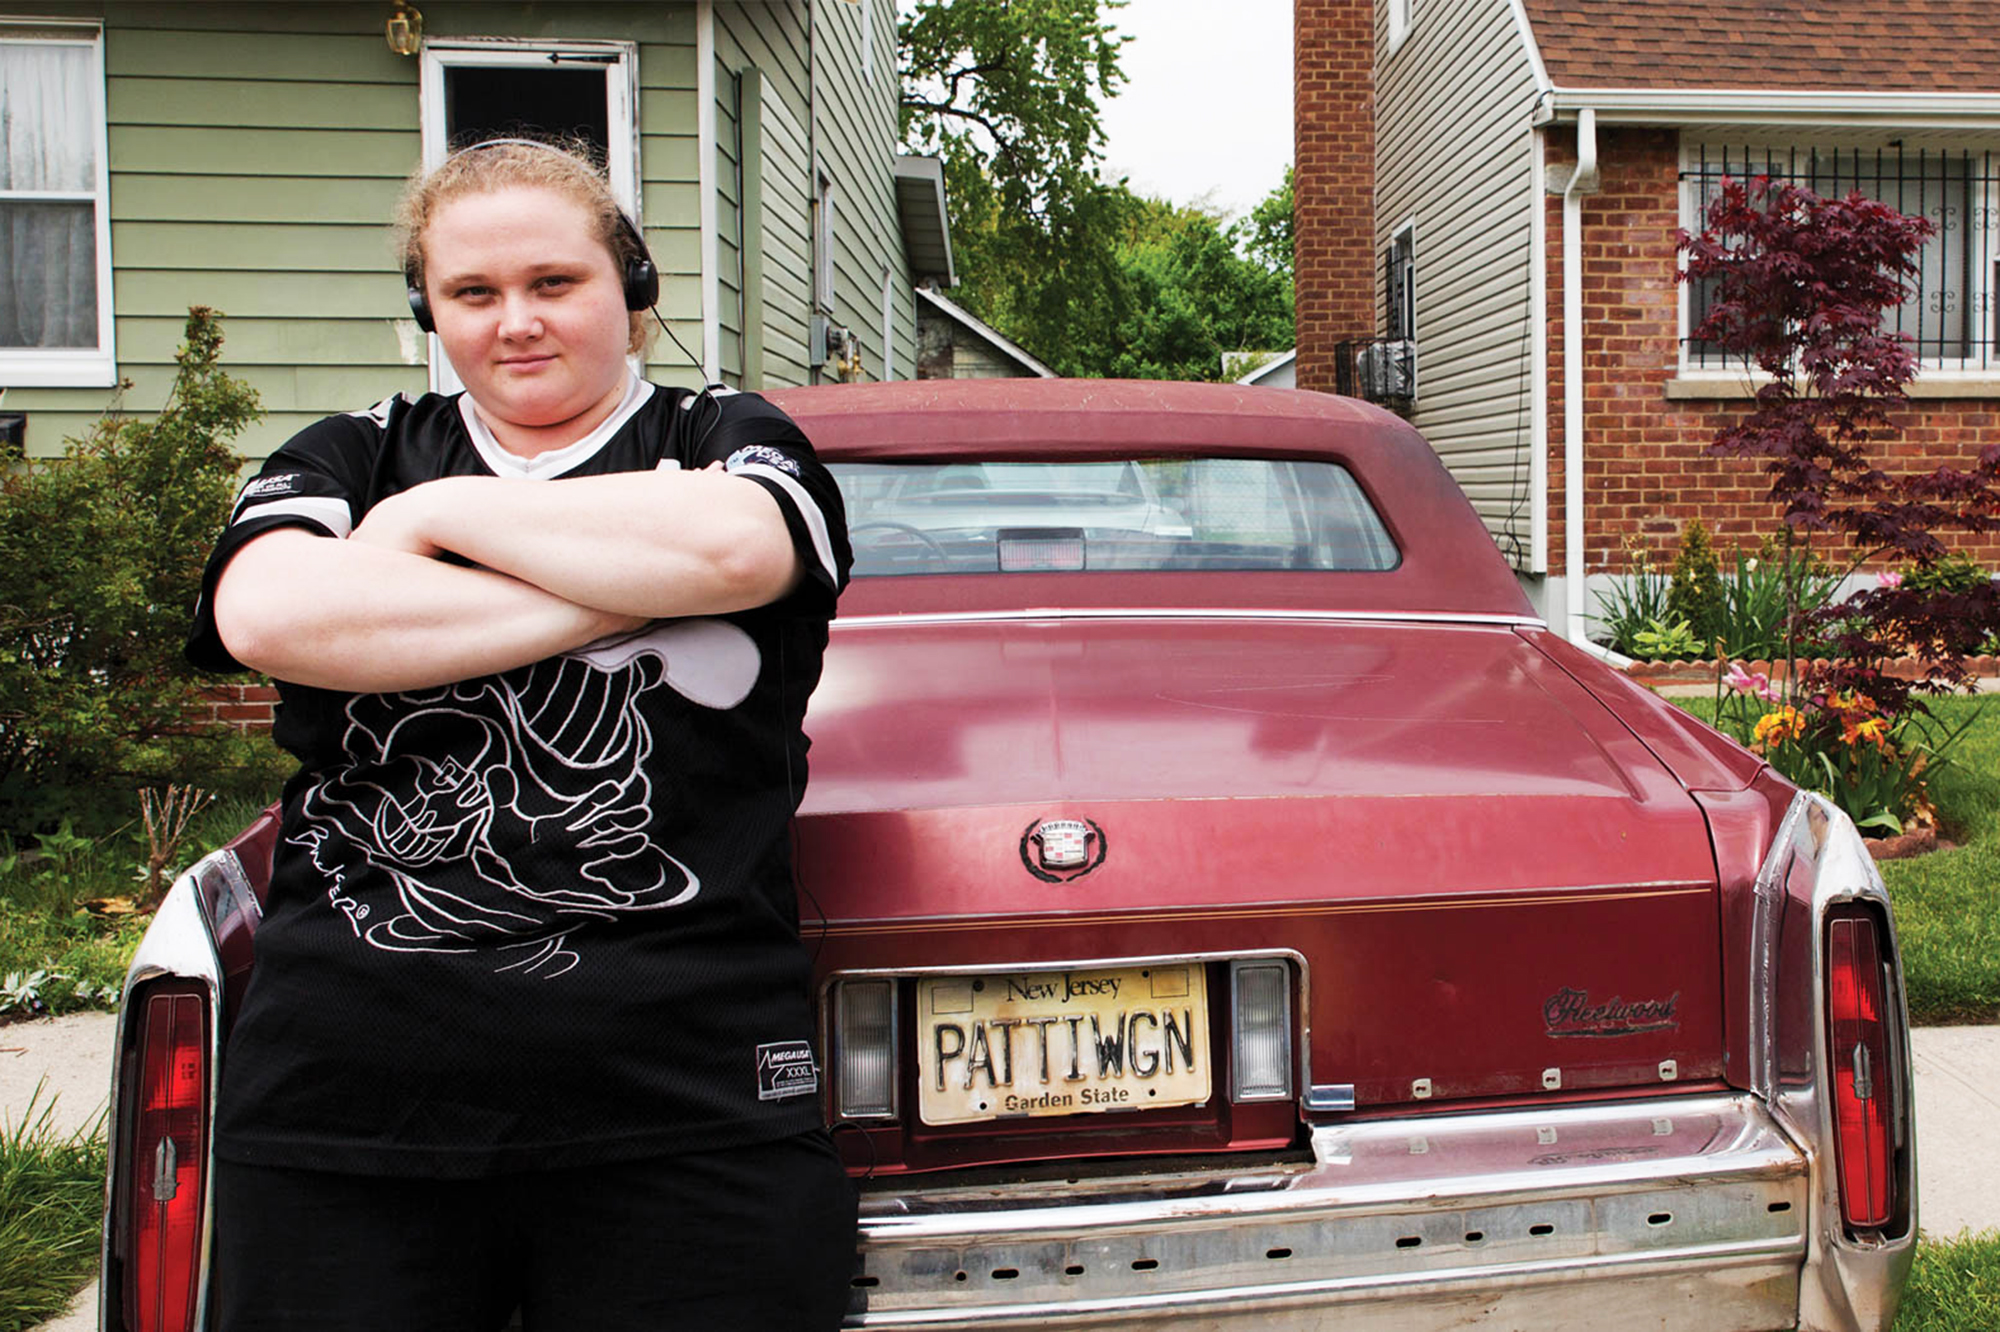 Danielle Macdonald appears in Patti Cake$, an official selection of the U.S. Dramatic Competition at the 2017 Sundance Film Festival. Courtesy of Sundance Institute.